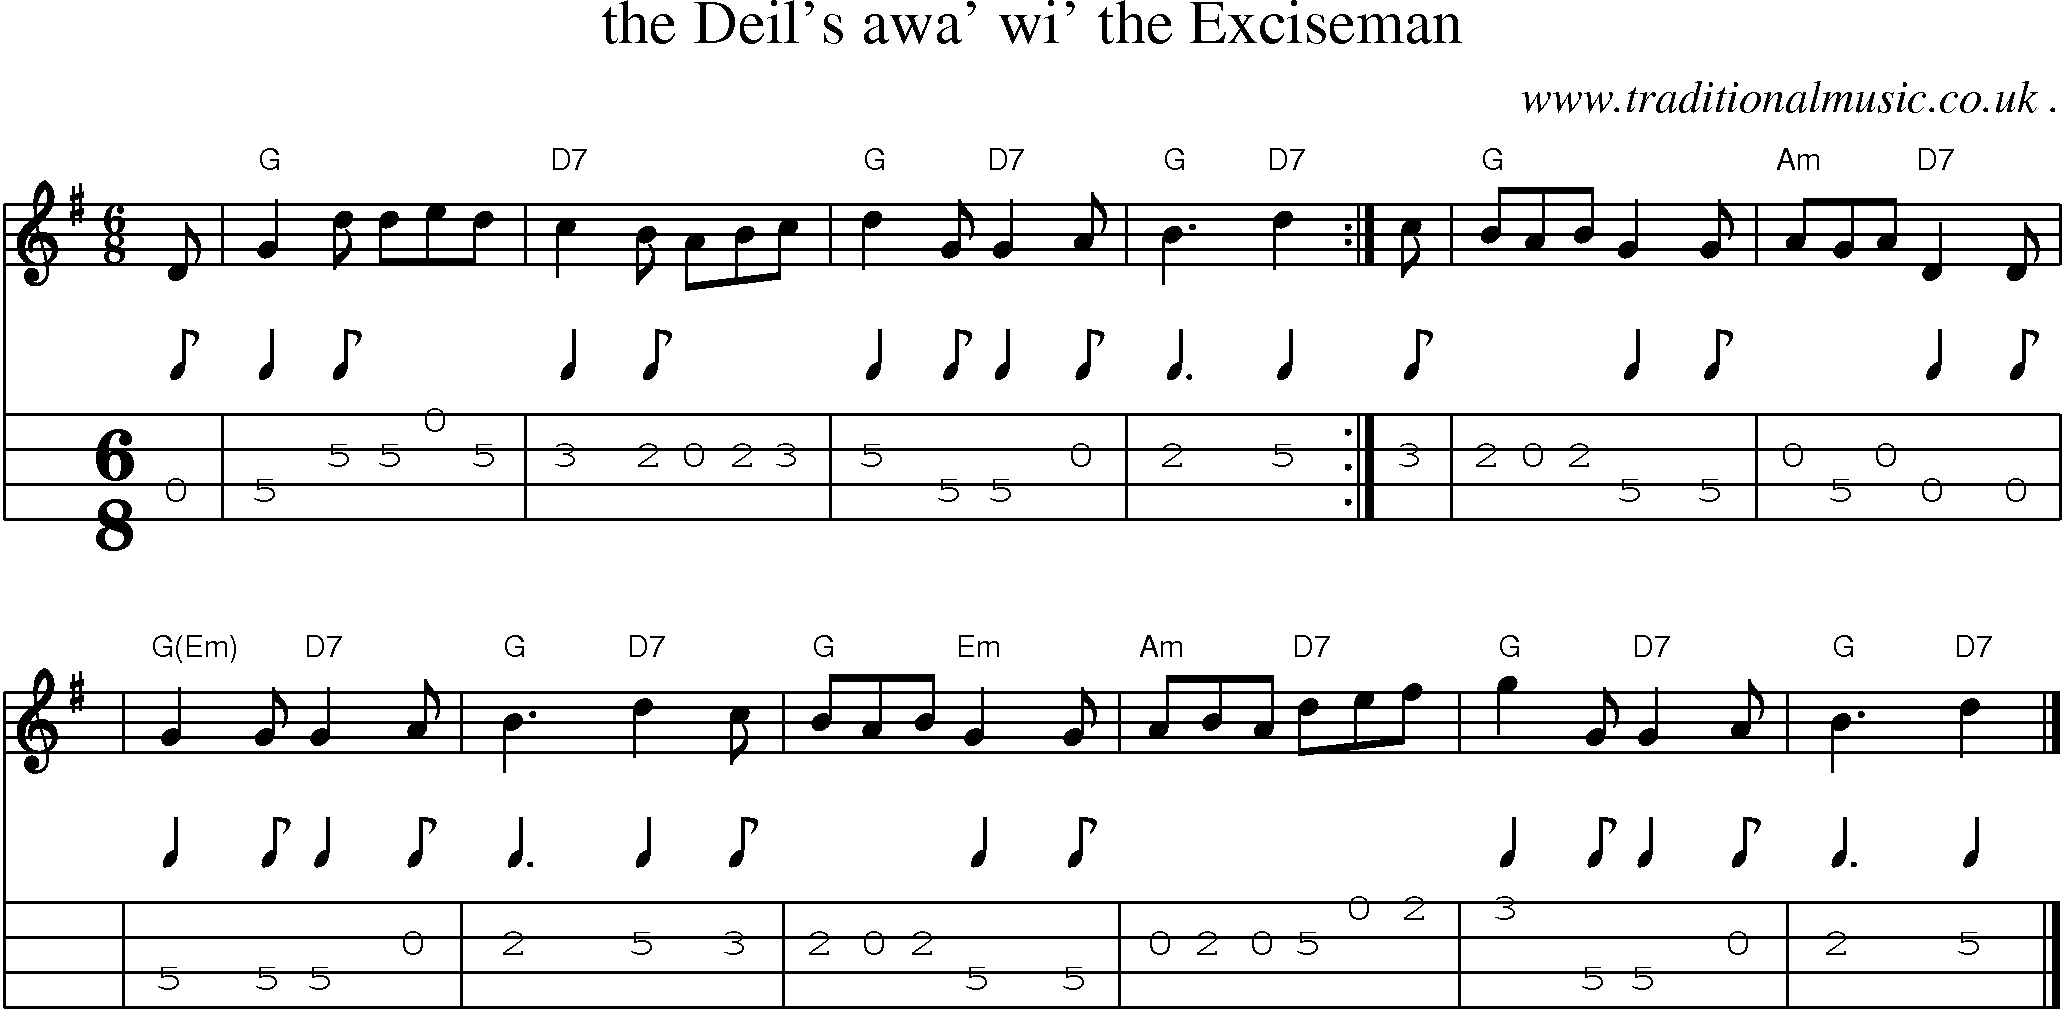 Sheet-music  score, Chords and Mandolin Tabs for The Deils Awa Wi The Exciseman